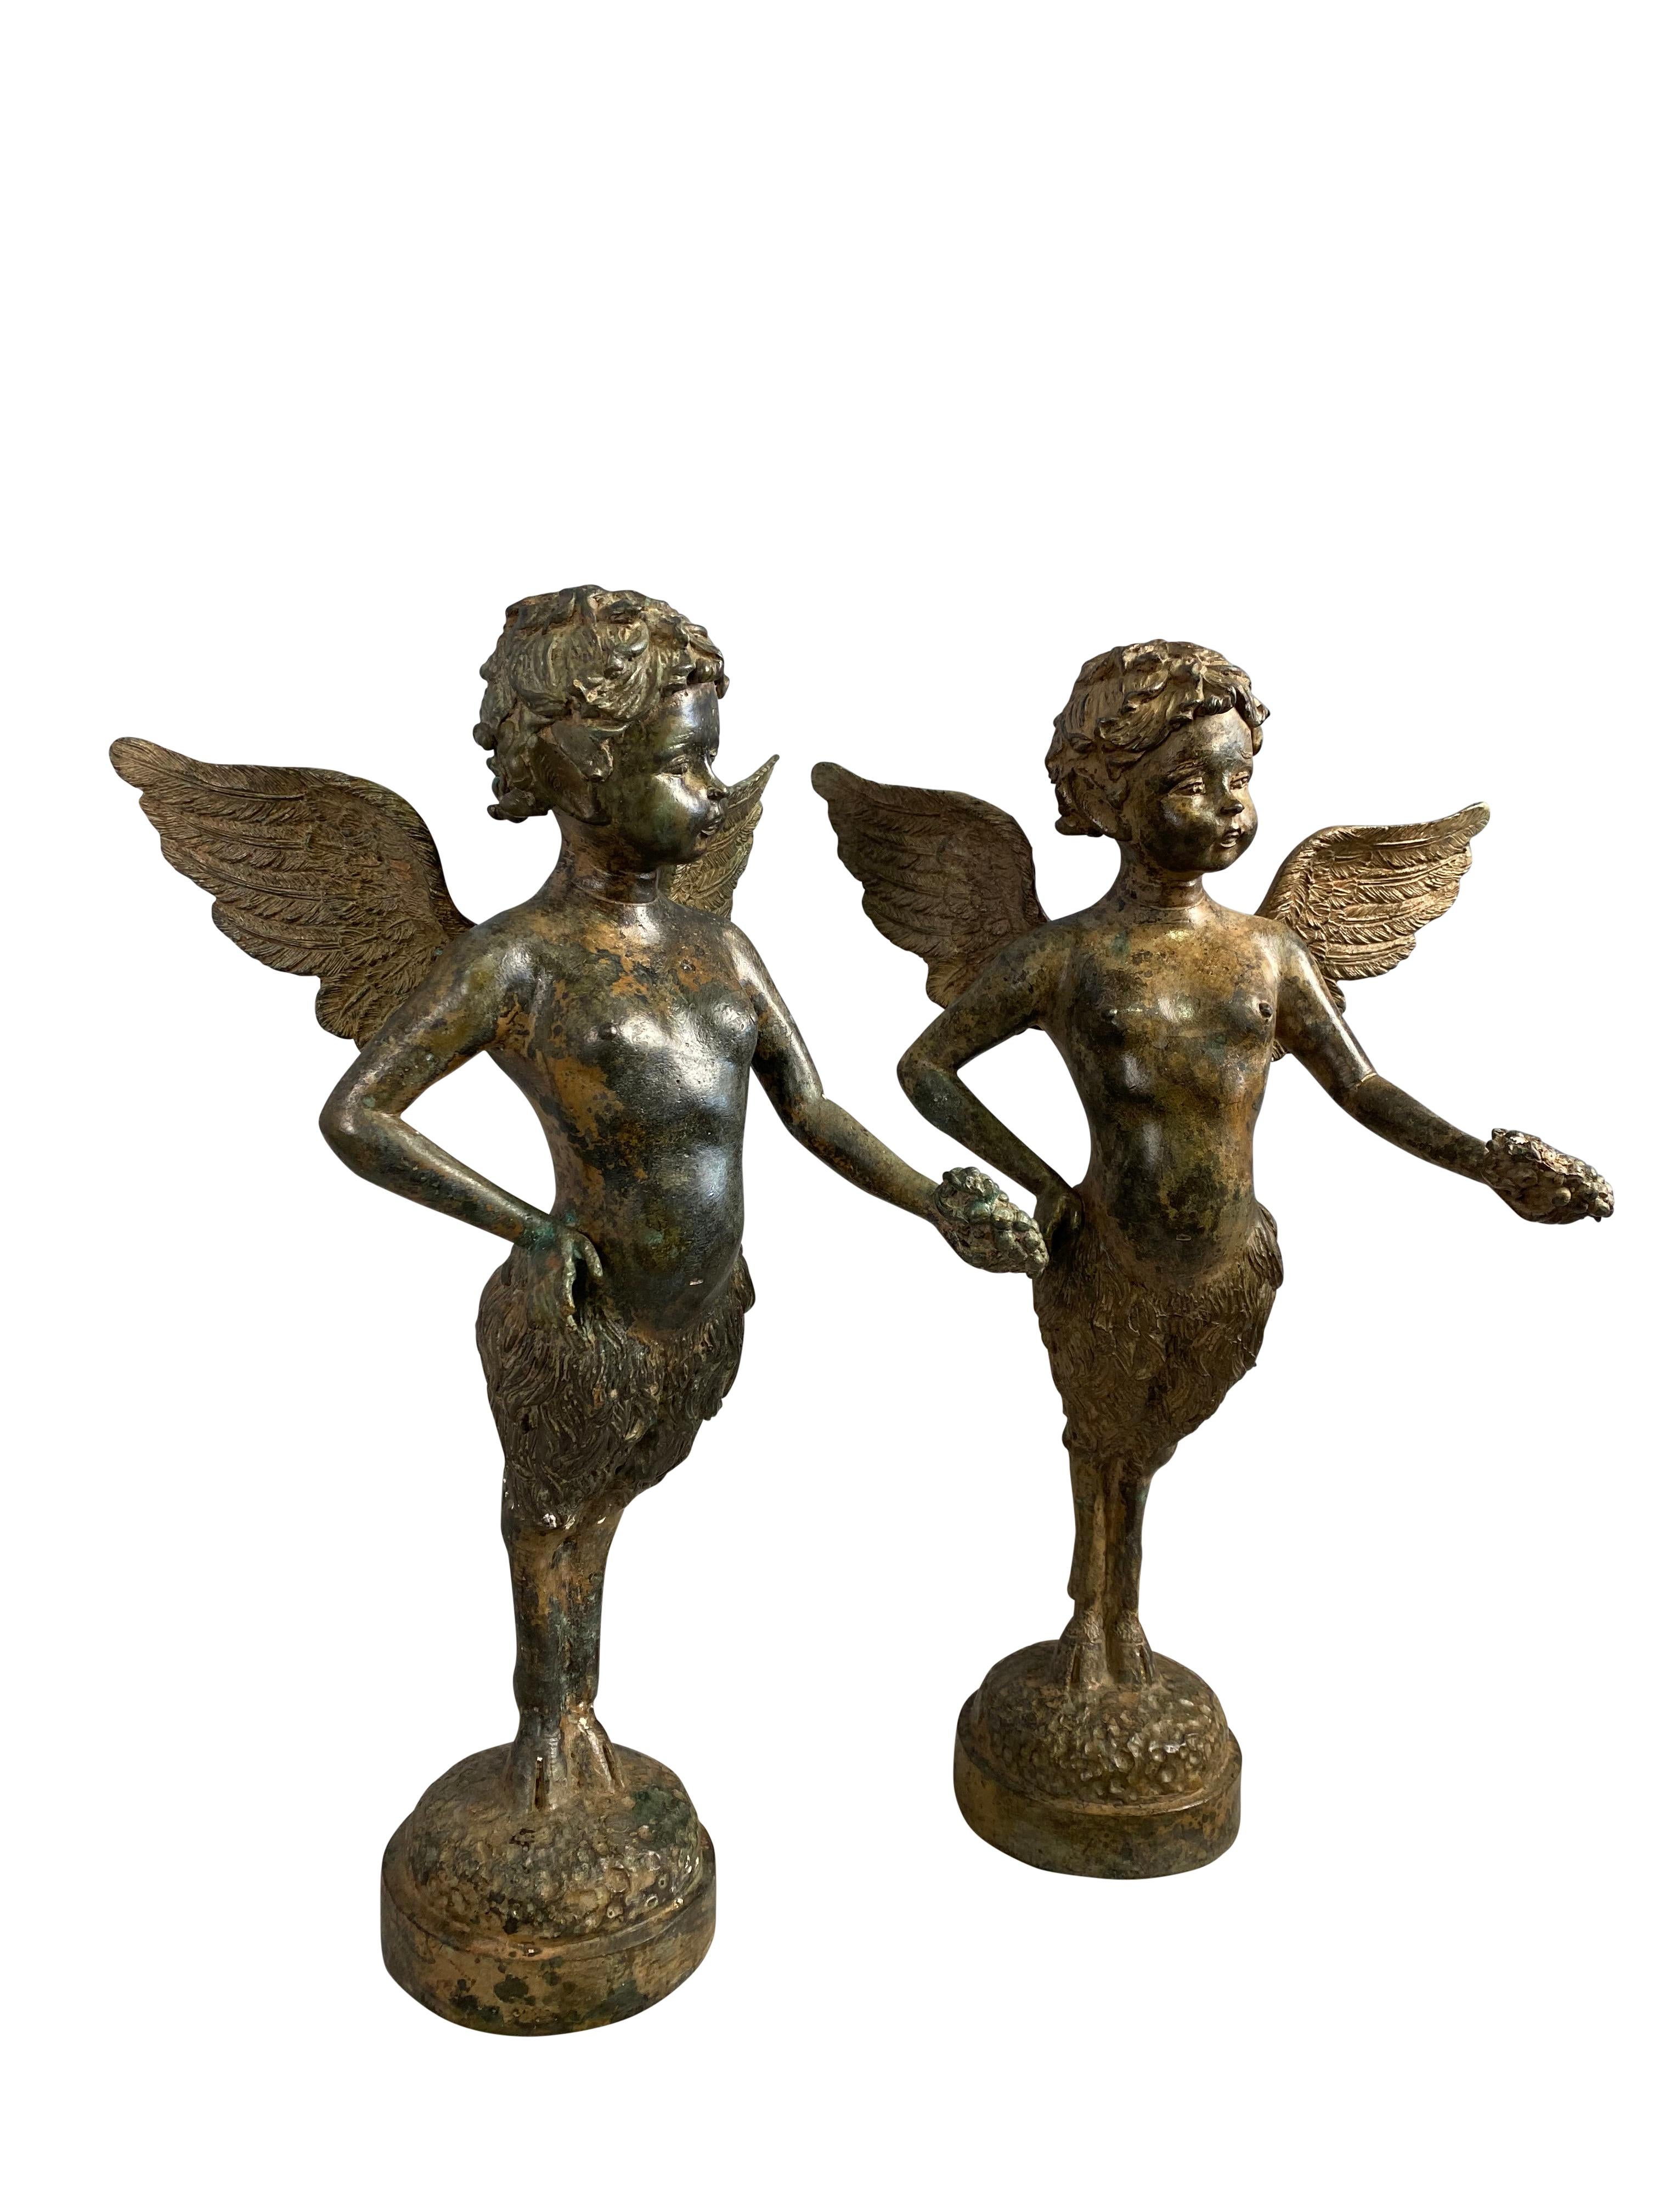 A fine pair of French bronze cherubs standing contrapposto, both extending an arm, each of which is holding a bunch of grapes.

Dimensions (cm)
40 H/20 W/10 D.